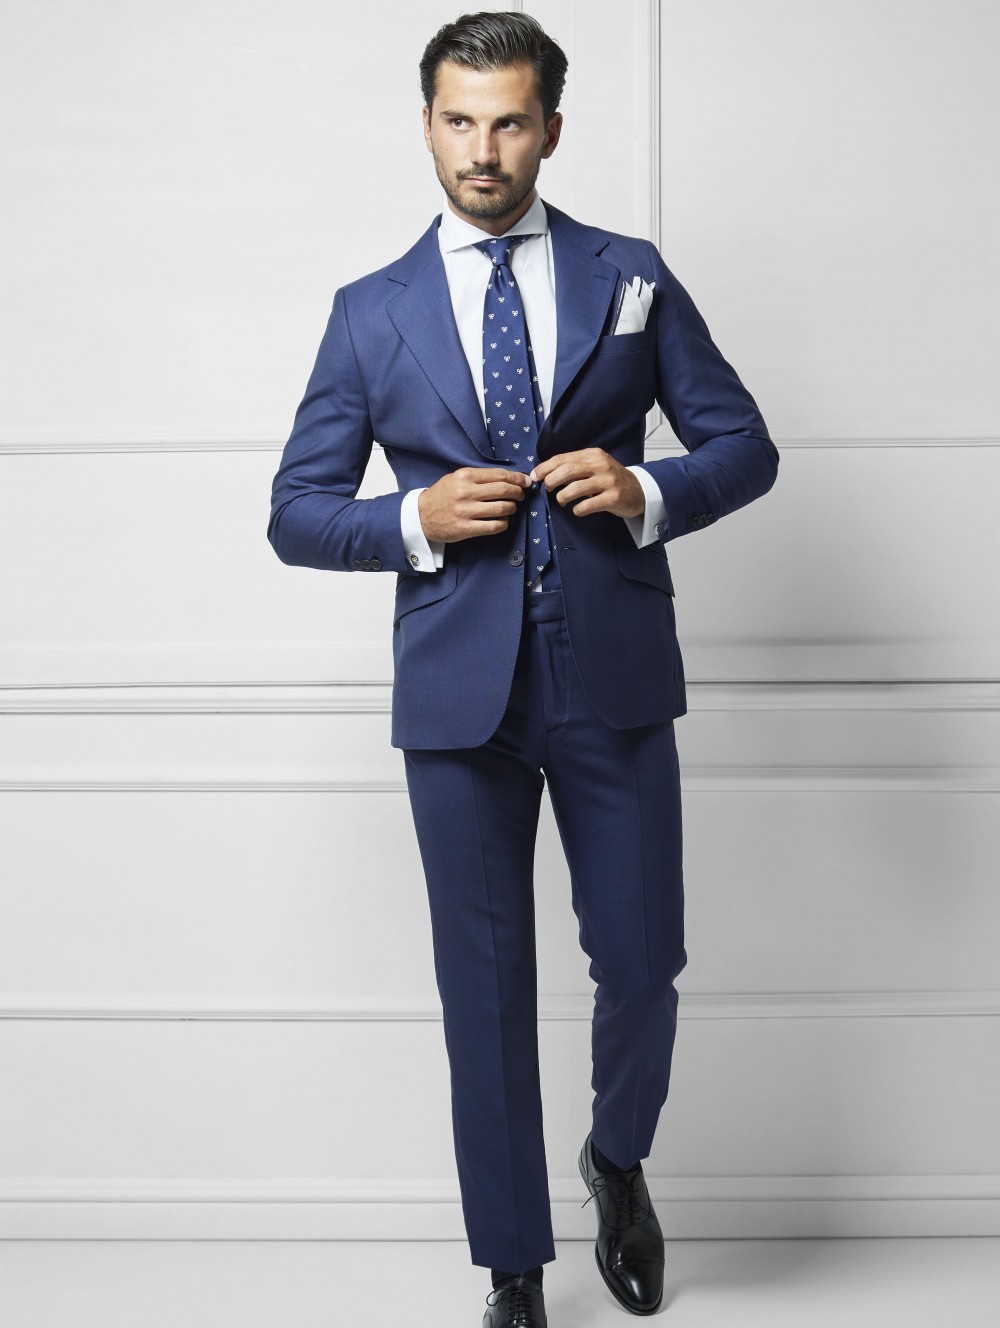 MALE MODELS IN SUITS: MANU MORAL for SILBÓN